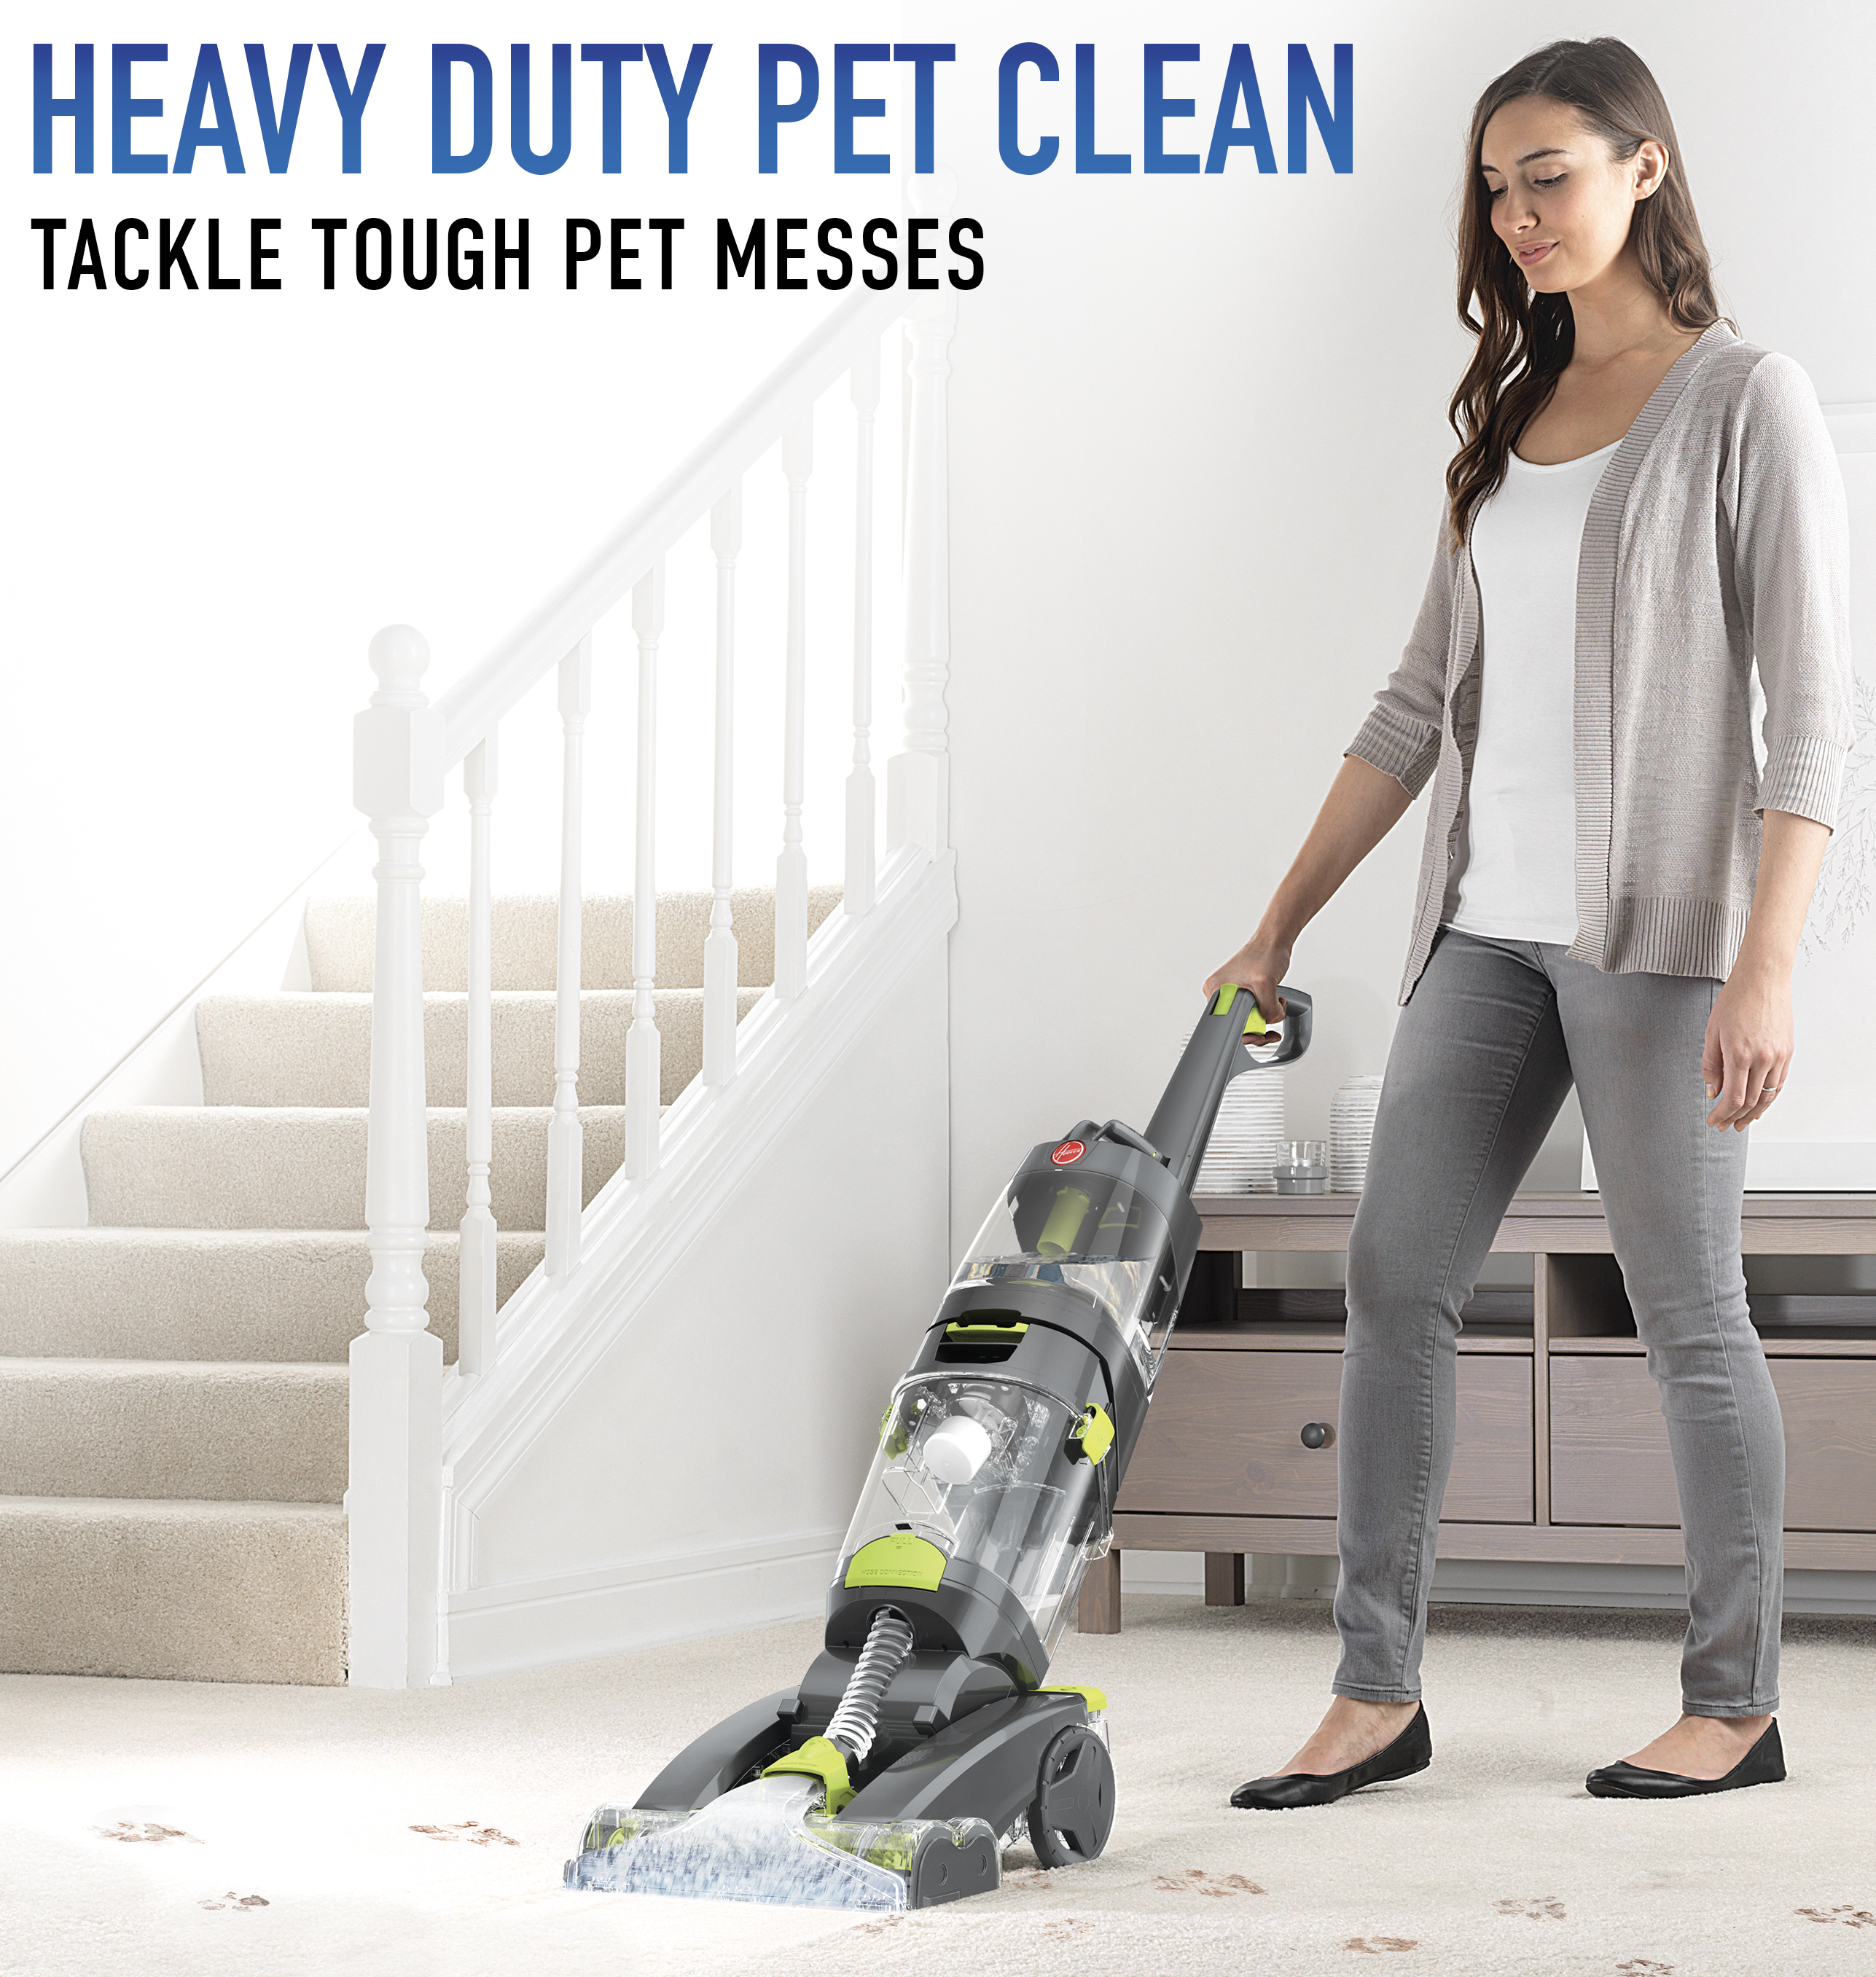 Hoover Pro Clean Pet Carpet Cleaner Machine FH51010 - image 5 of 12